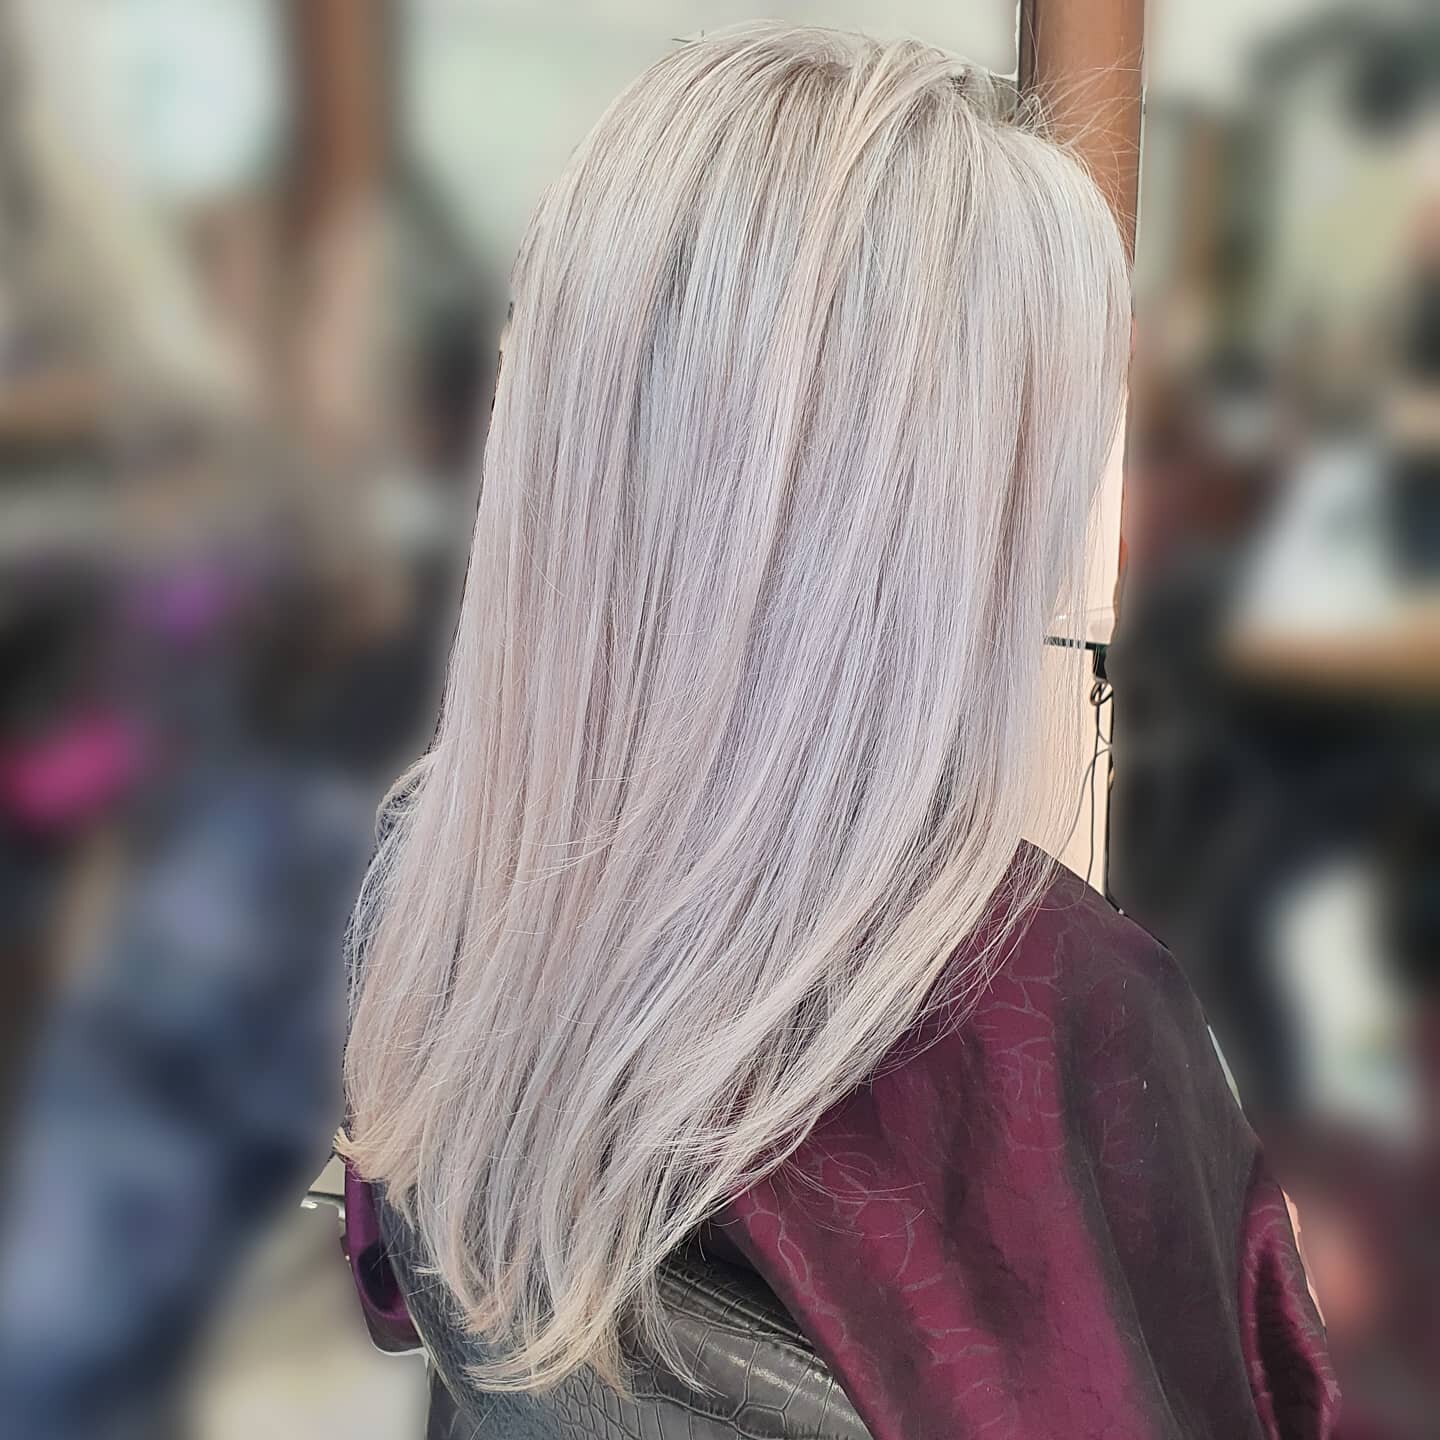 Nordic ❄ icy vibes ❄ from this beauty today @castielshairstudio 

Chopped and styled by @beatacastielhair

Coloured by 
@beatacastielhair using @lorealpro 
.
.
.
.
.
 #nofilterneeded #iceblondehair #frozen 
#lorealpro #moroccanoil #hairoftheday